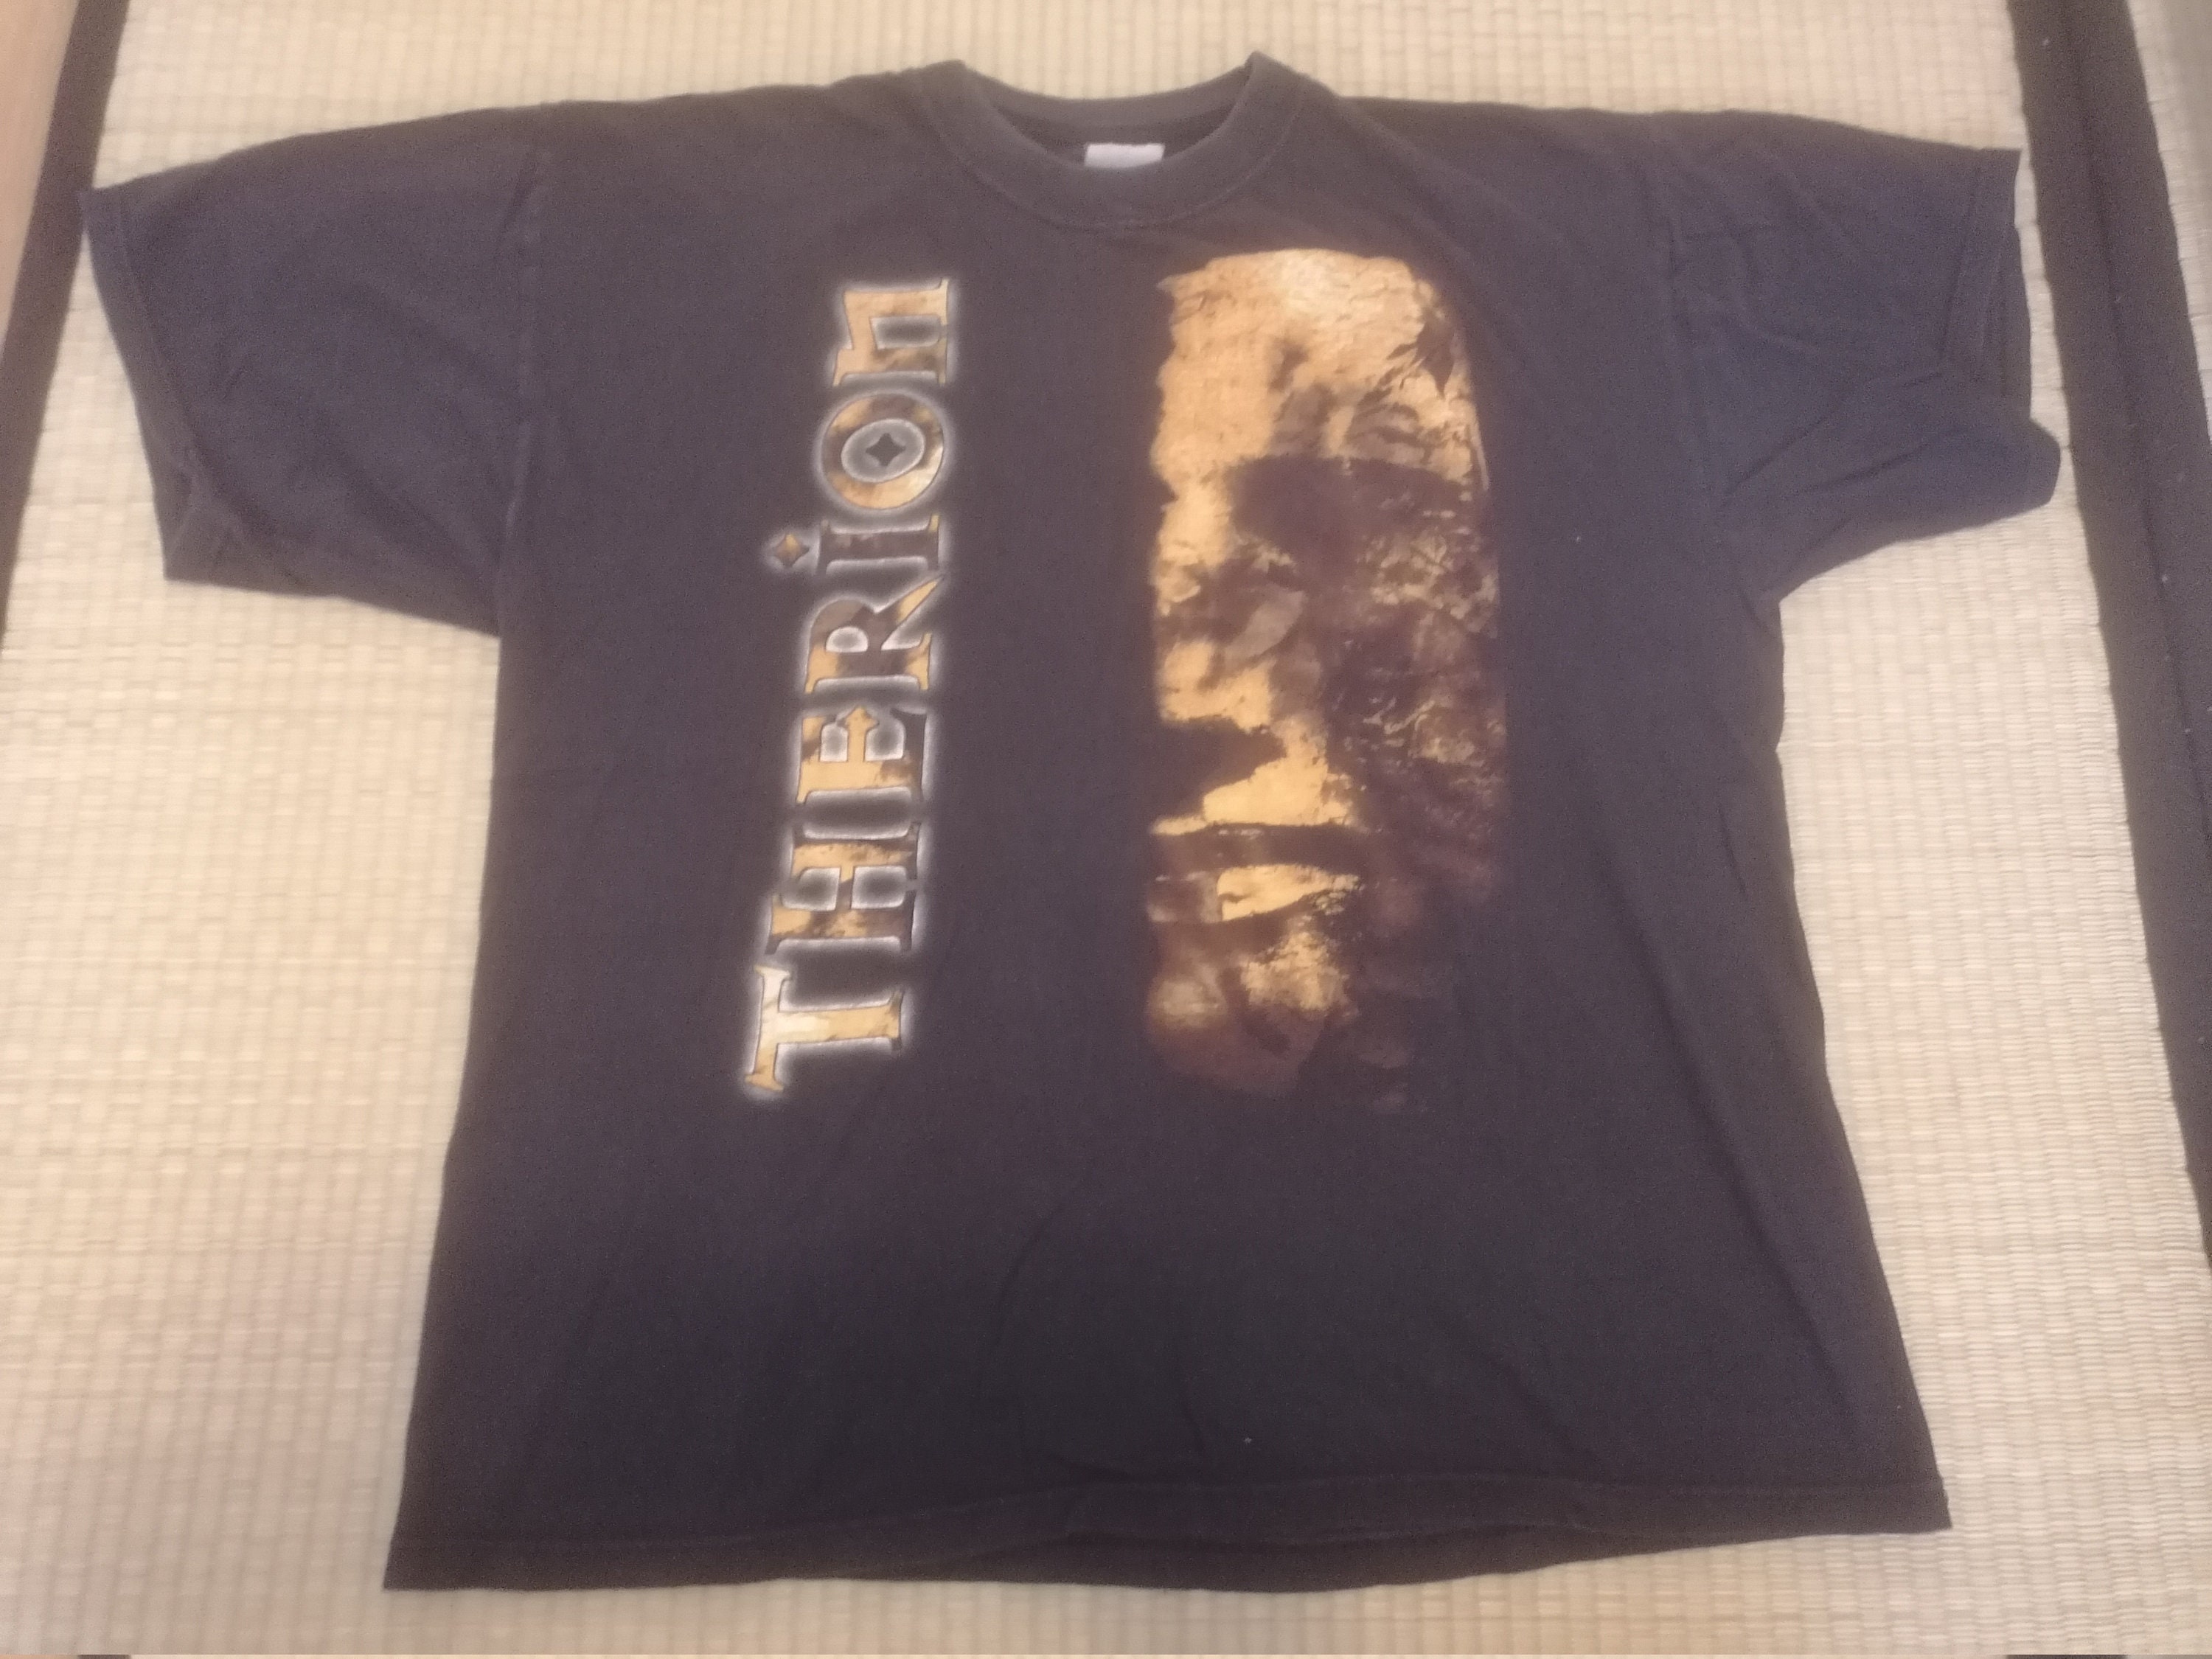 Therion T-Shirts, Therion Merchandise